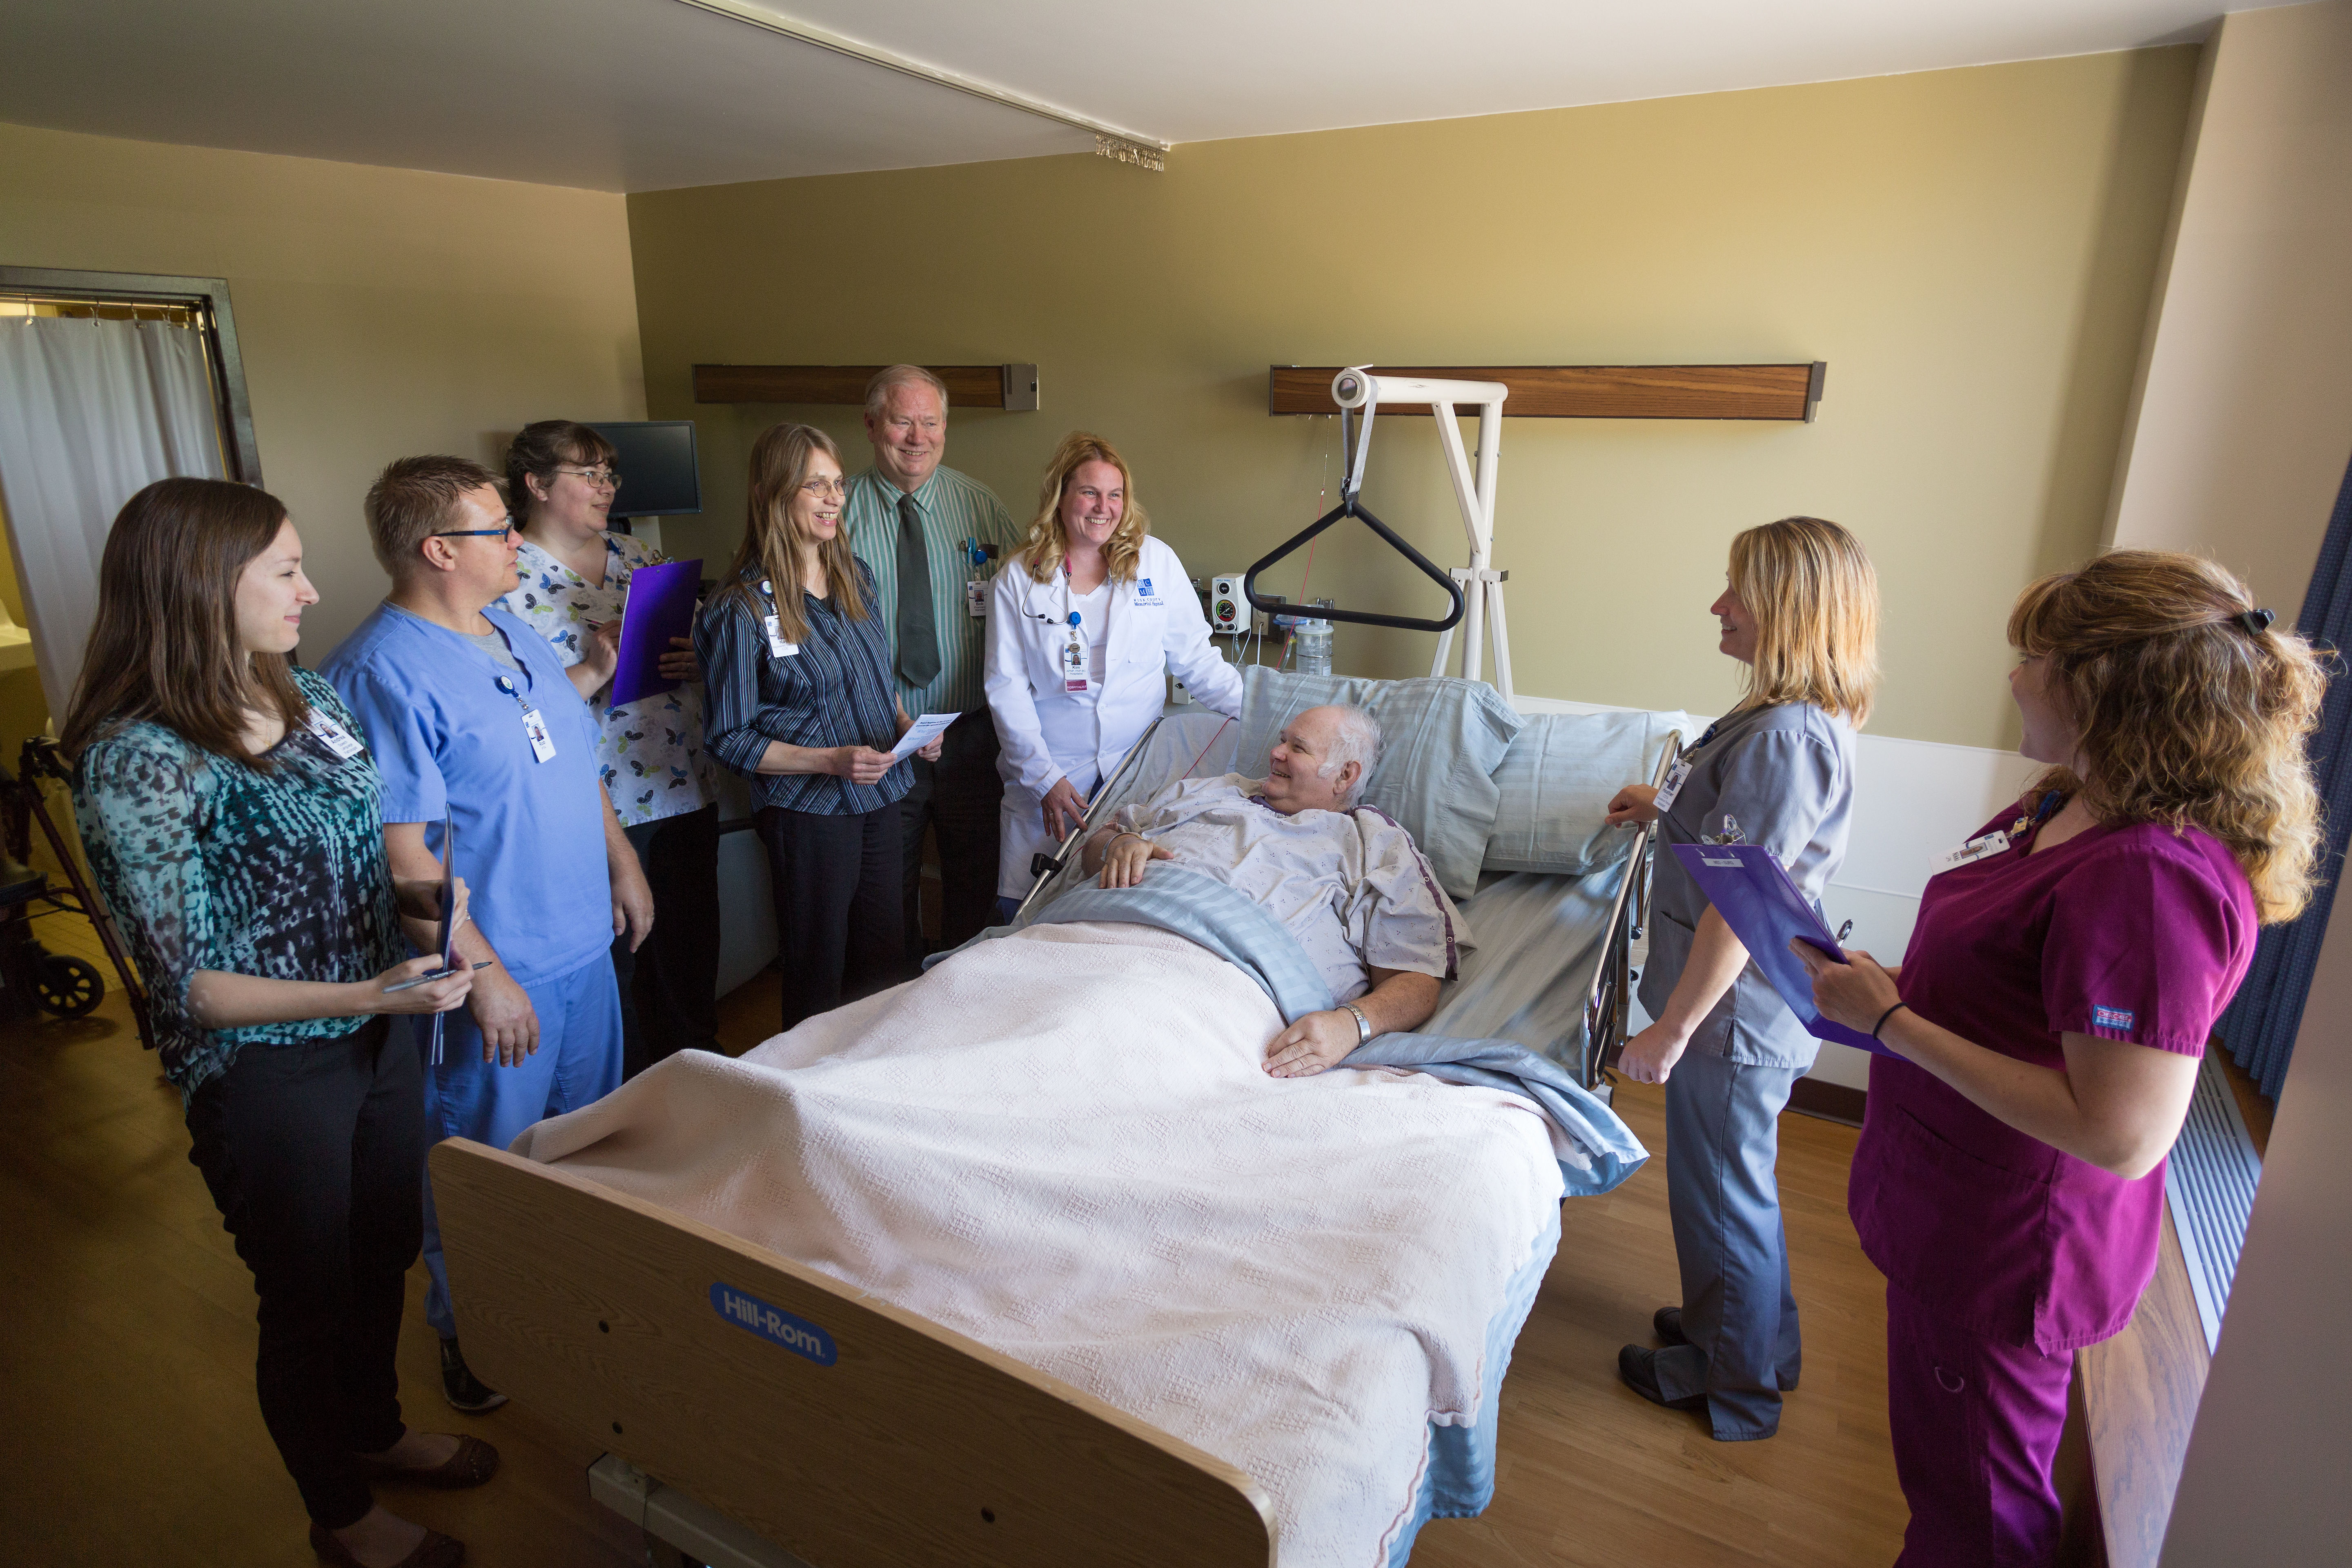 The future of rural hospitals is promoting wellness, maintaining access, and aiding the elderly in retaining their health and independence, says Rusk County Memorial Hospital CEO Charisse Oland. Photo credit: Rusk County Memorial Hospital